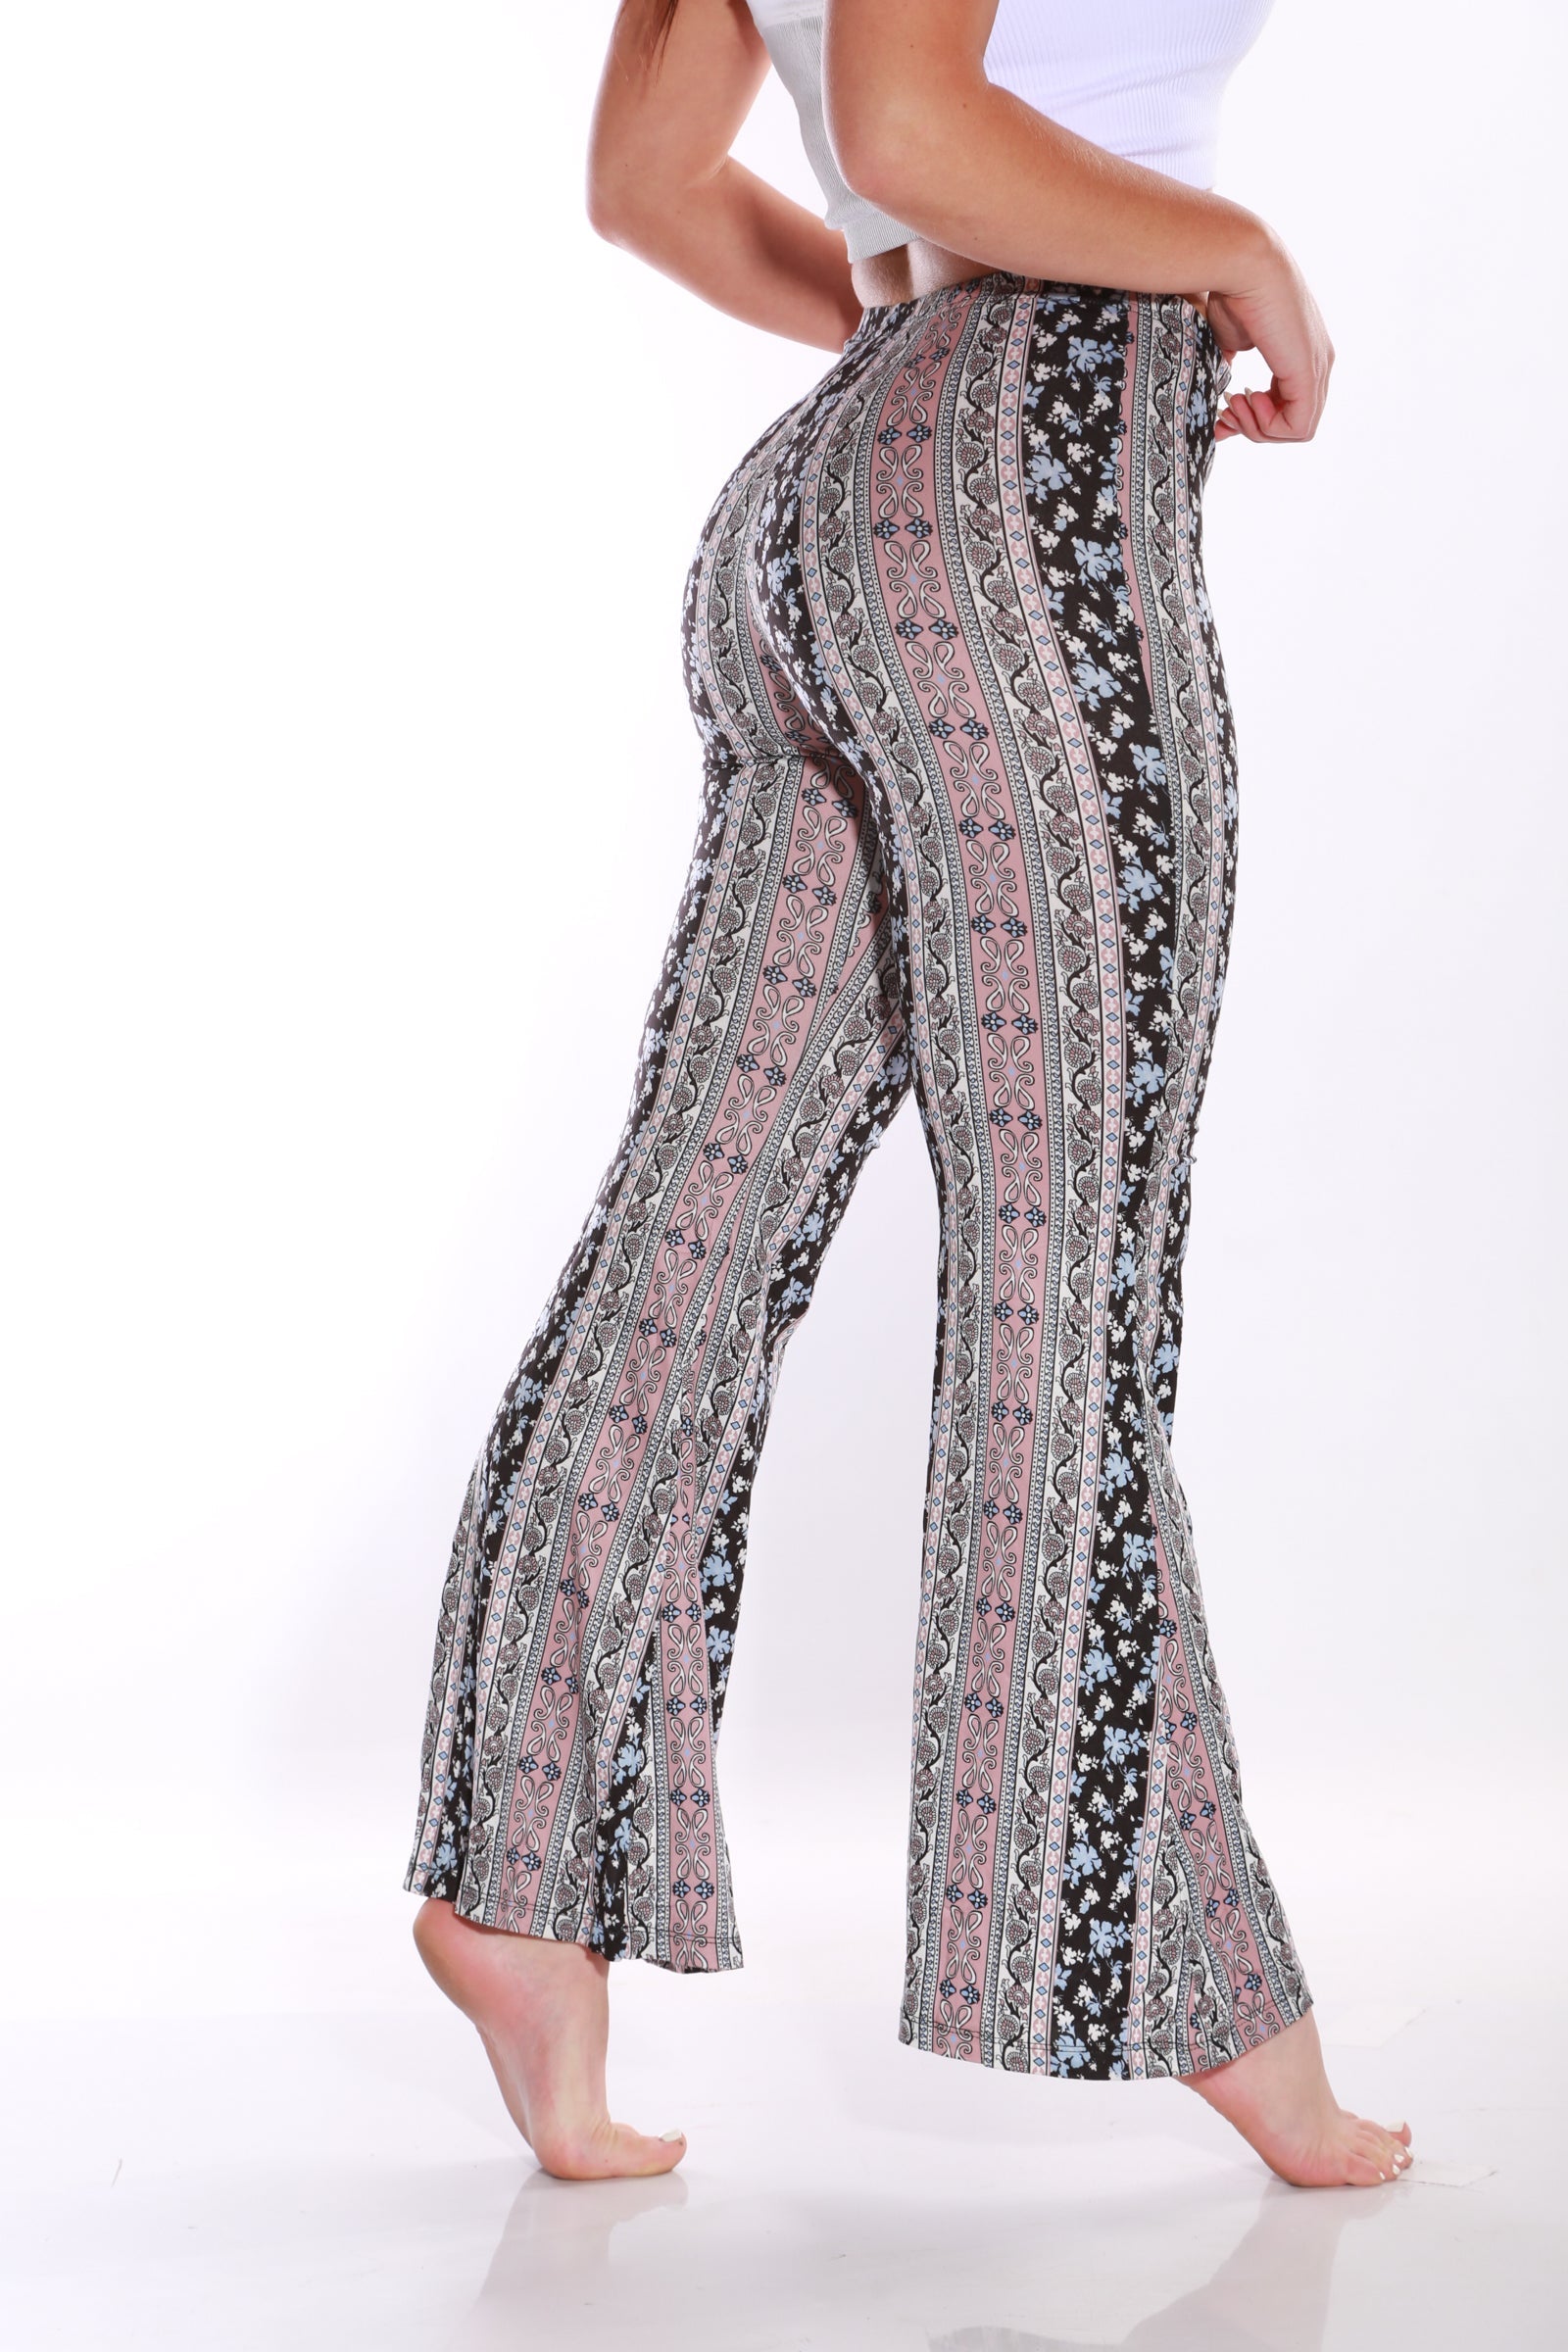 Image of TNG Hippie flare Leggings -pink